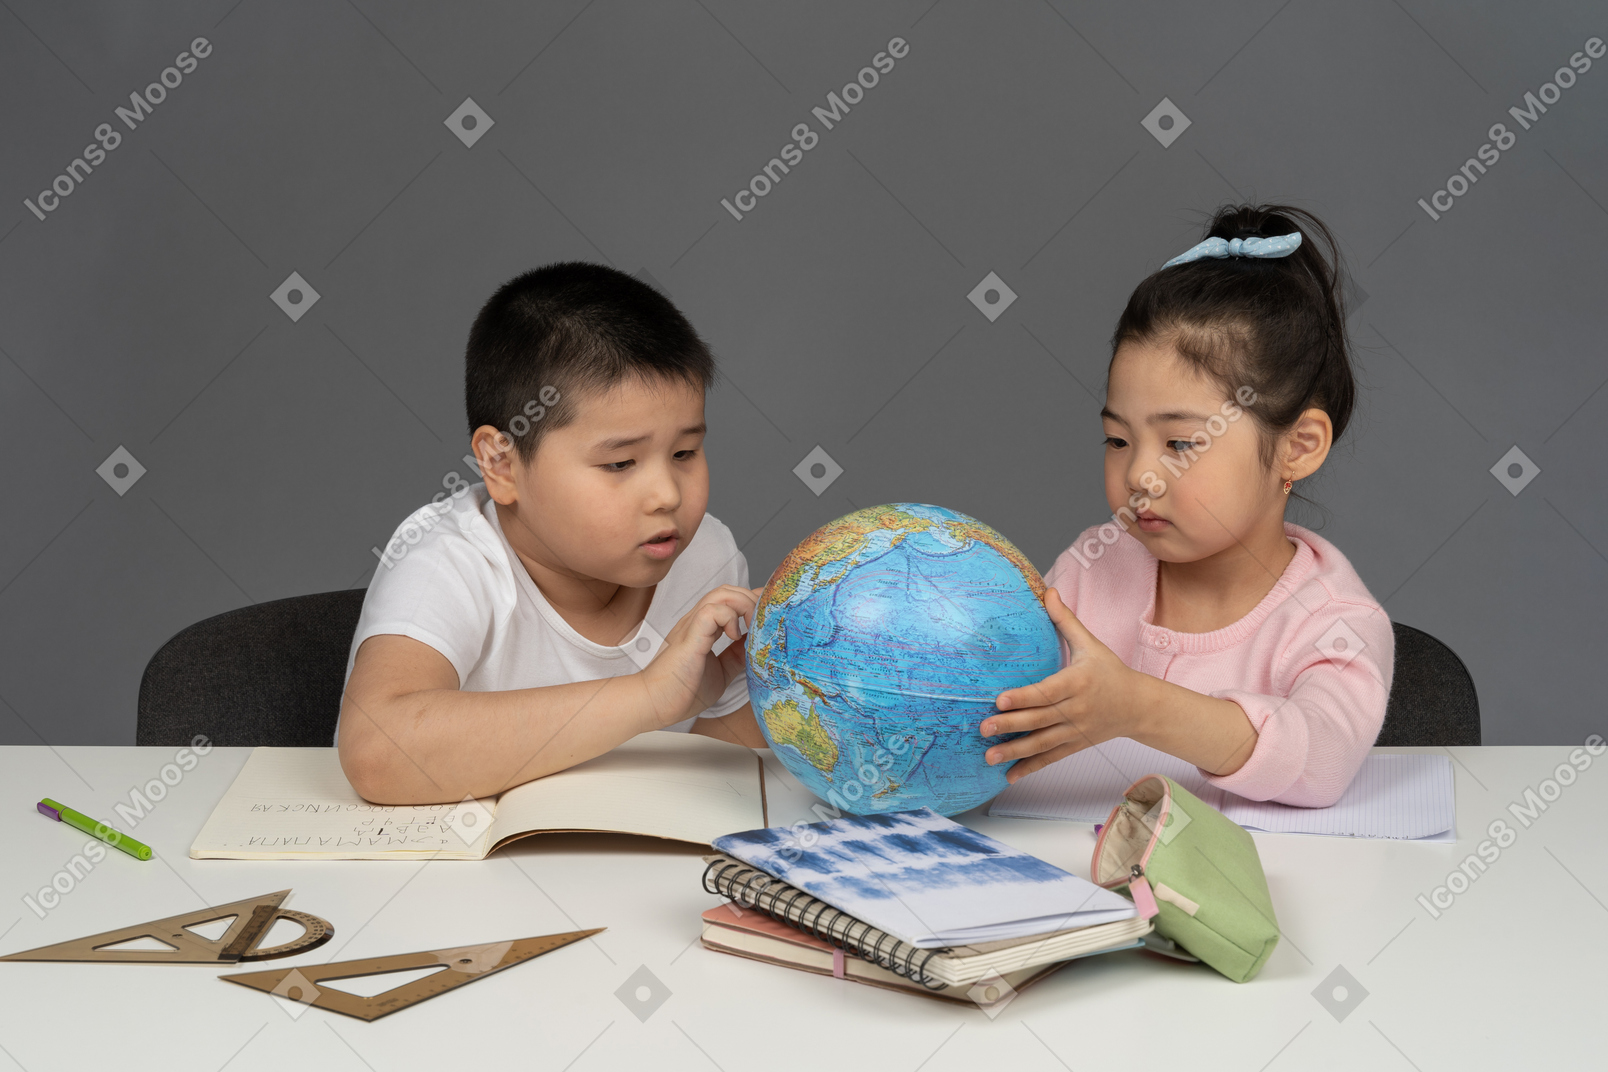 Boy and girl looking at a desk globe